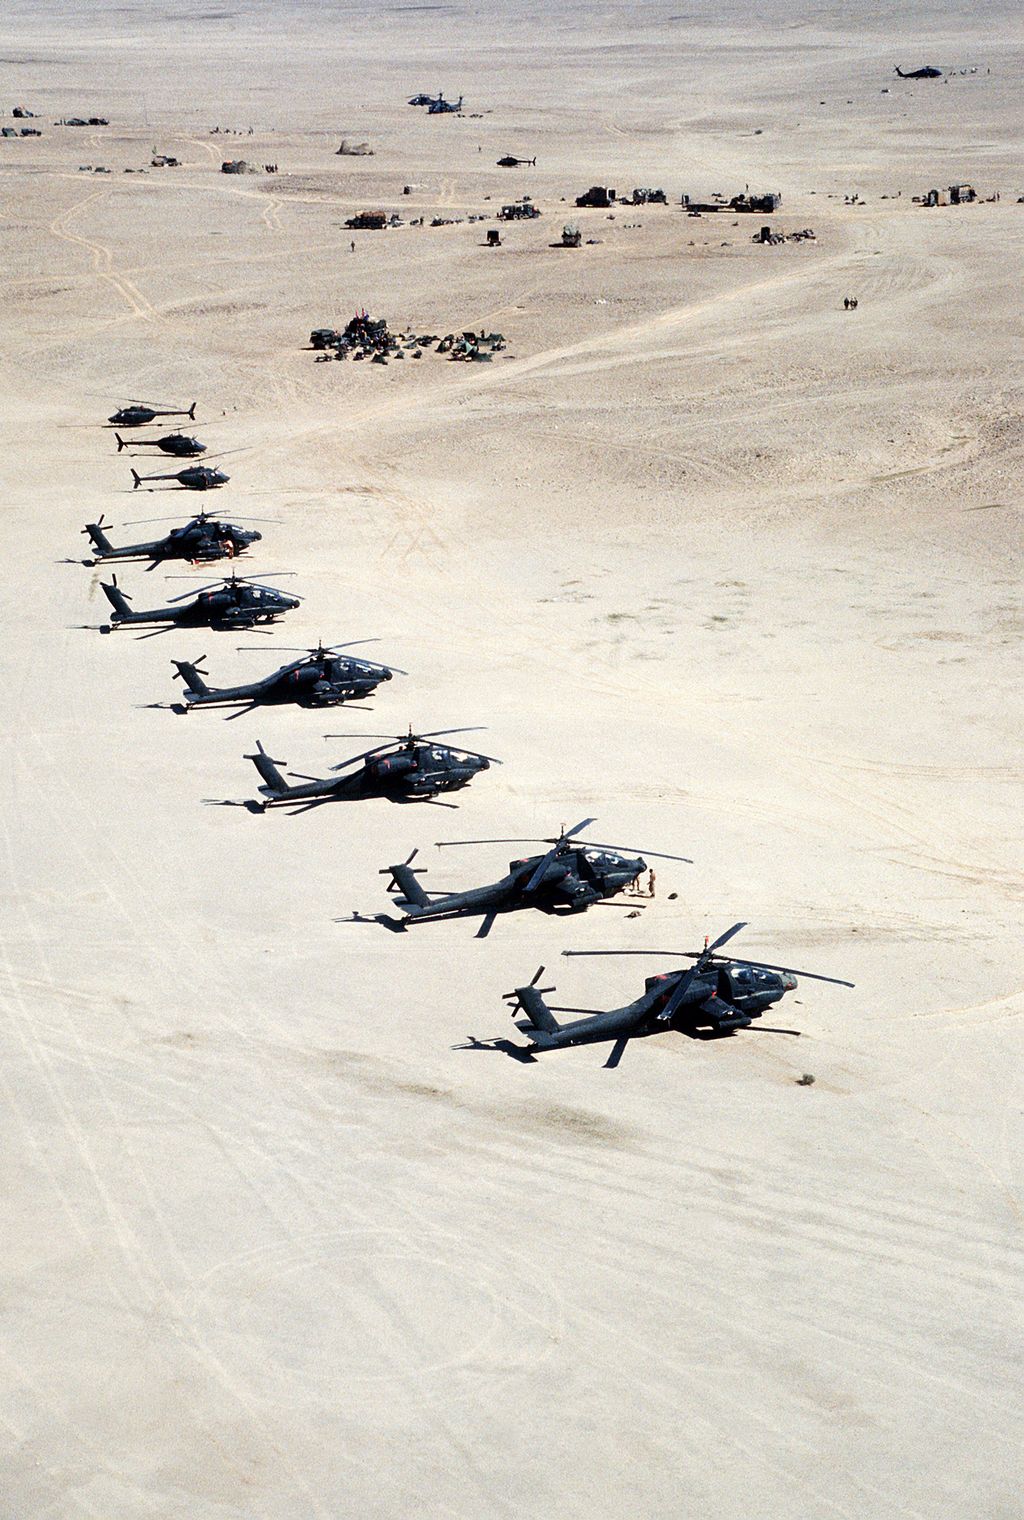 GUERRE DU GOLFE - HELICOPTERES APACHE AH-64A GUERRE GOLFE OPERATION DESERT ARMEE AIR AMERICAINE AMERICAIN TEMPETE HELICOPTERE AH-64A APACHE KIOWA WARRIOR OH-58D GUERRE 